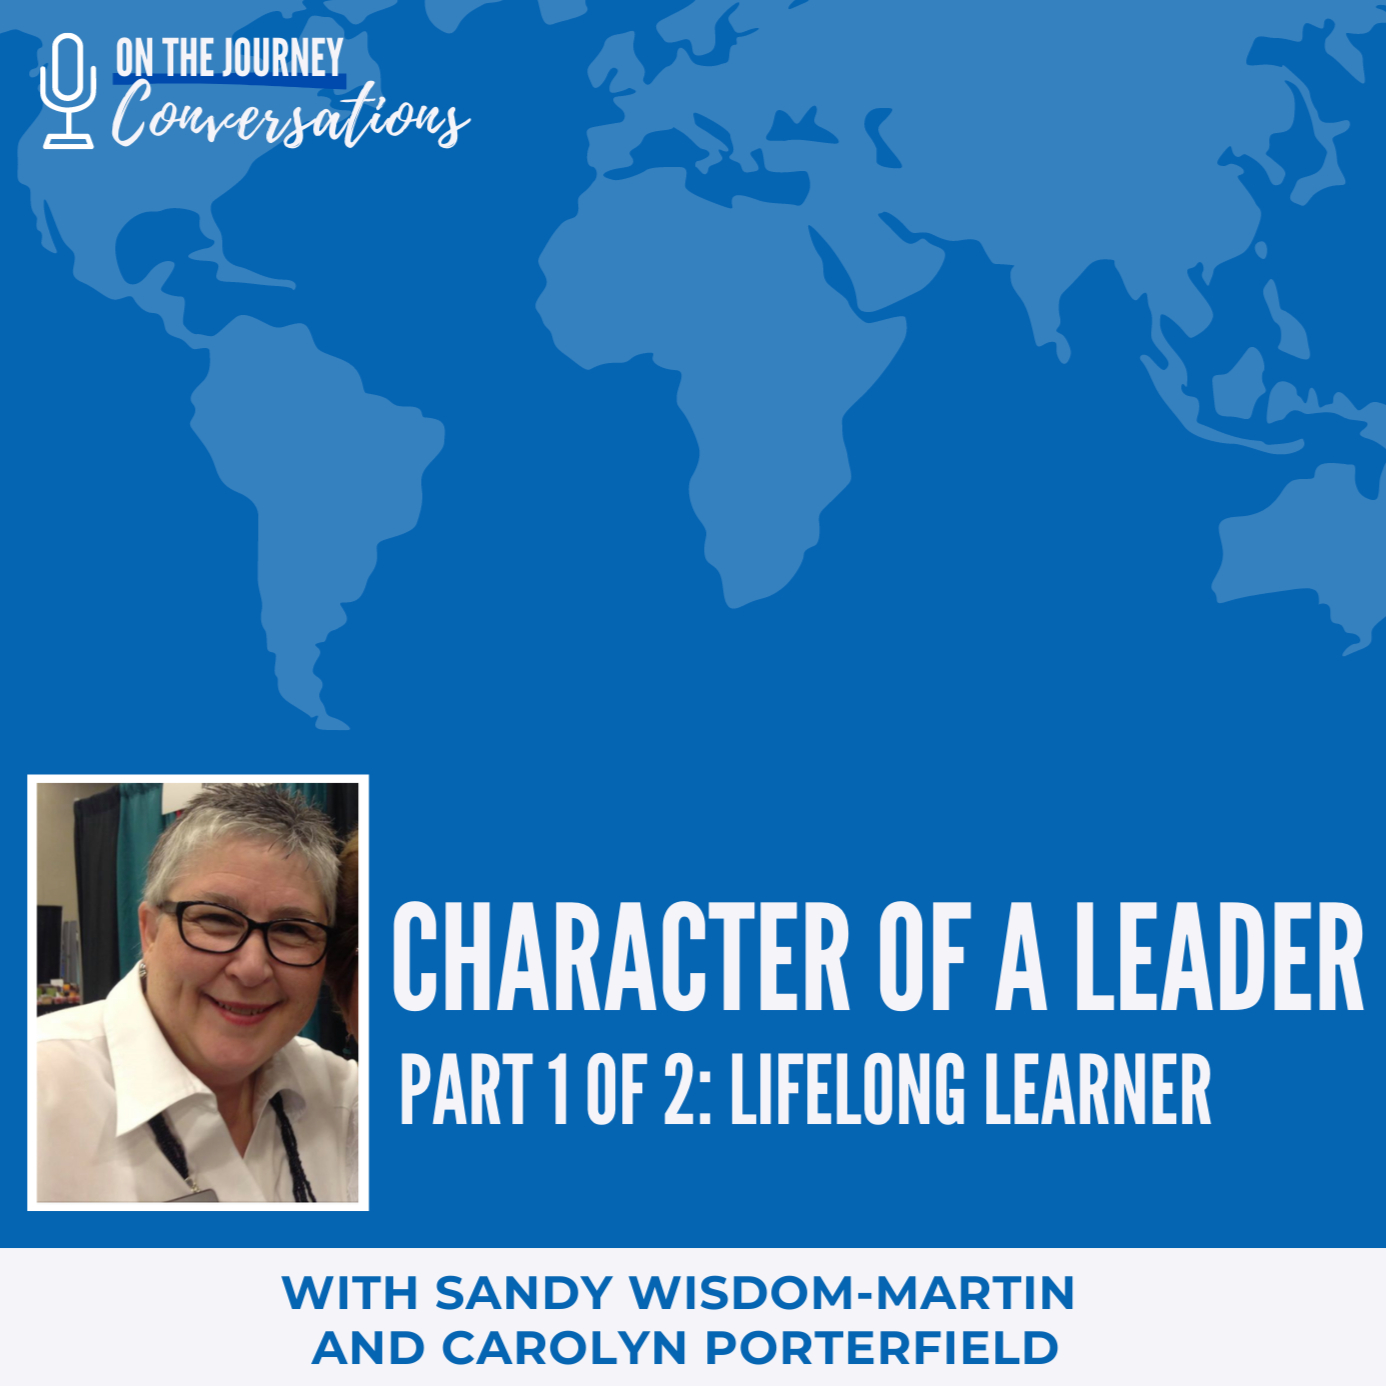 Character of a Leader—Part 1 of 2: Lifelong Learner